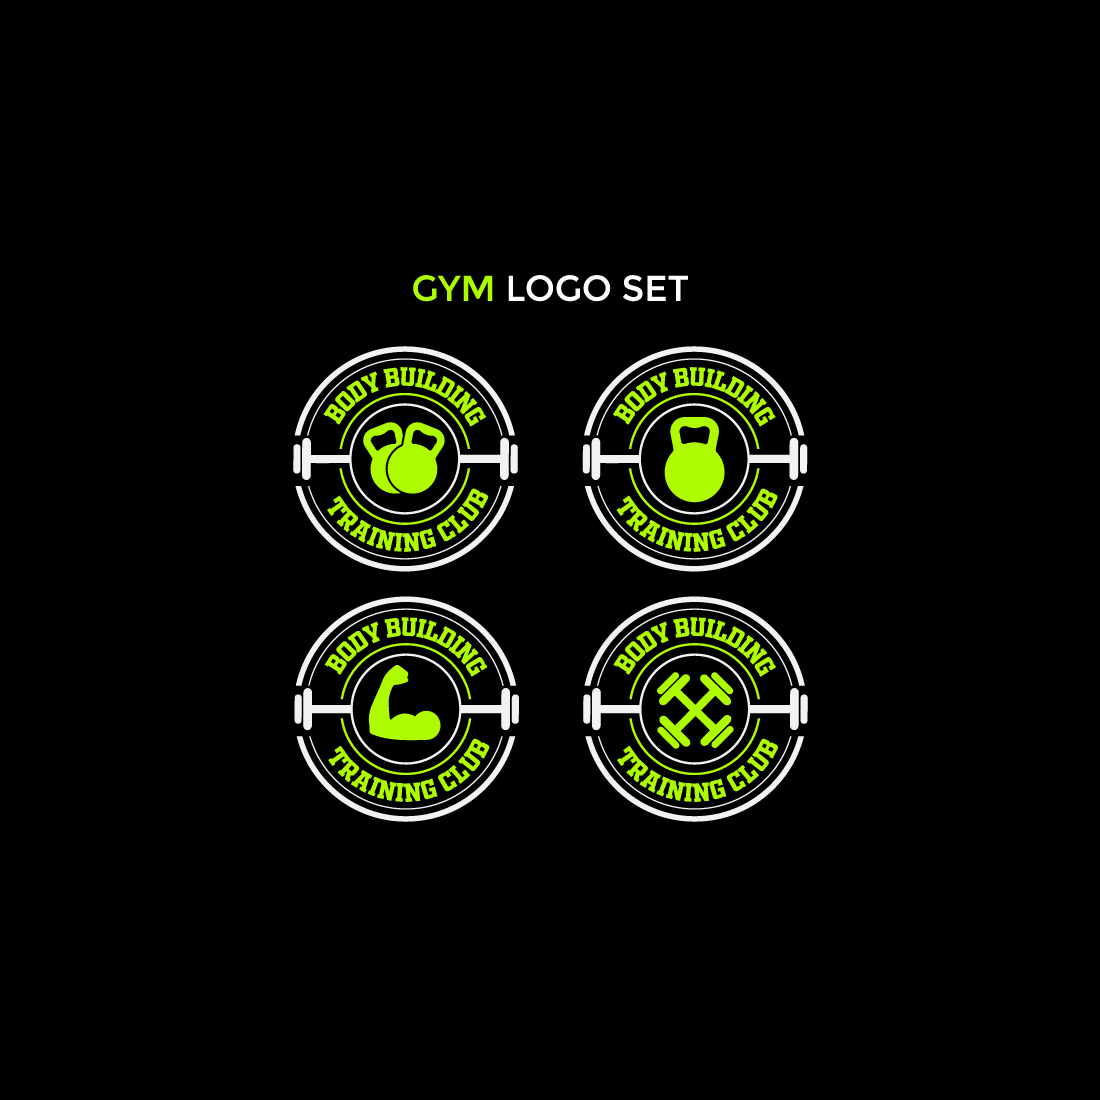 Preview images with four logos in green.